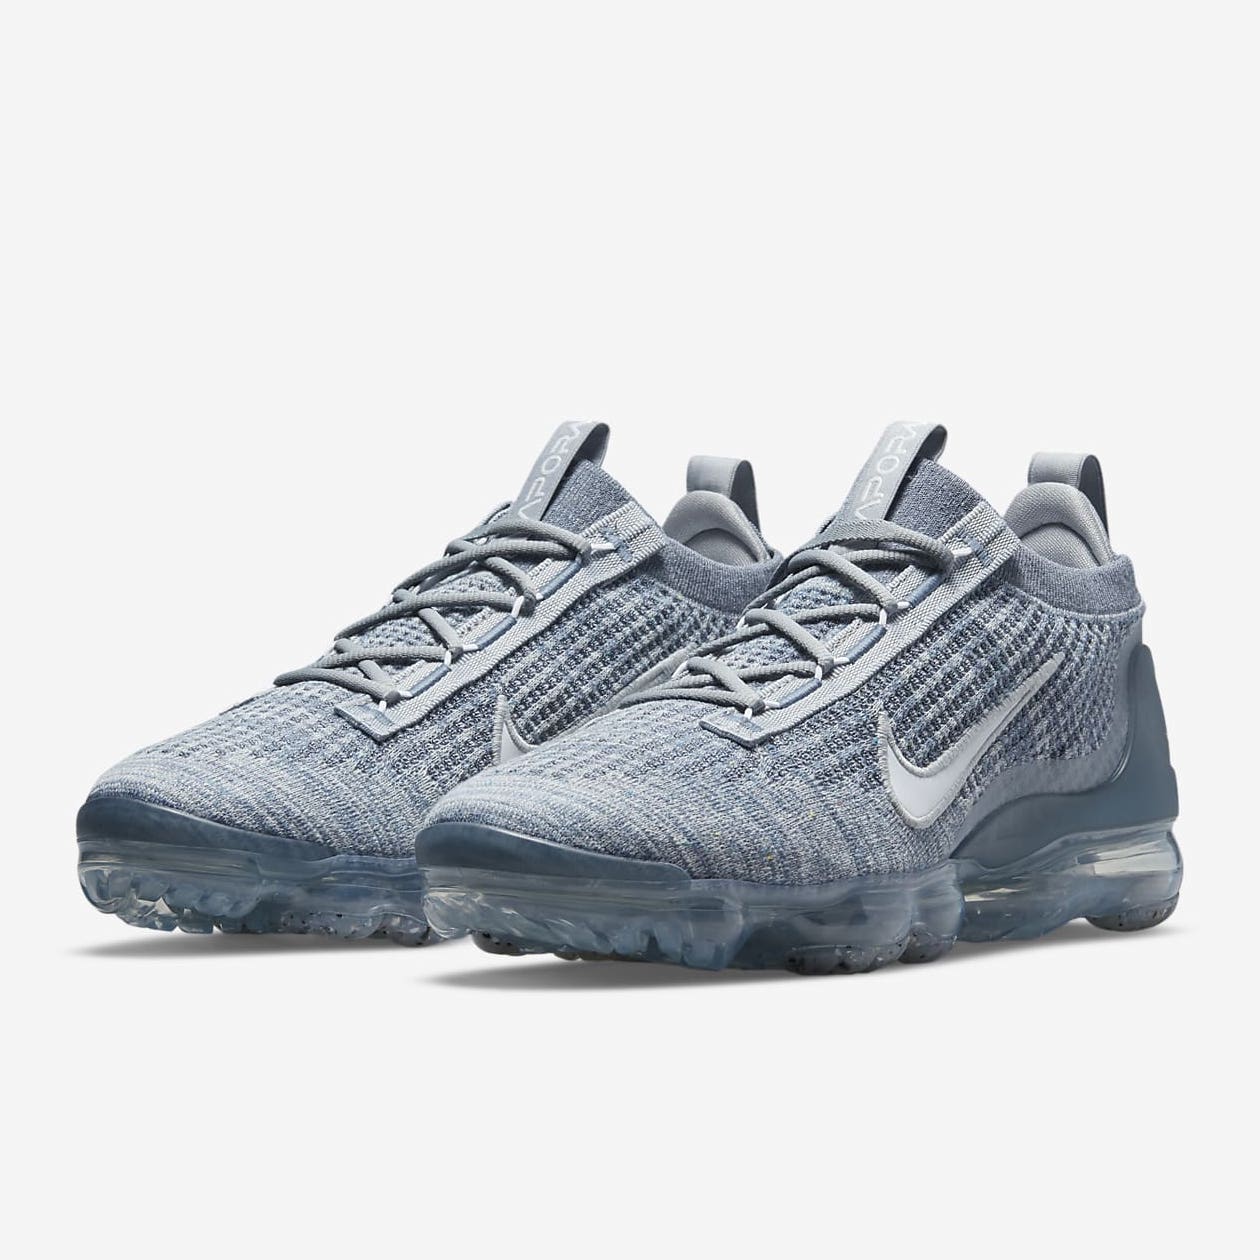 Nike Air VaporMax 2021 sneakers: Price in Singapore & where to buy